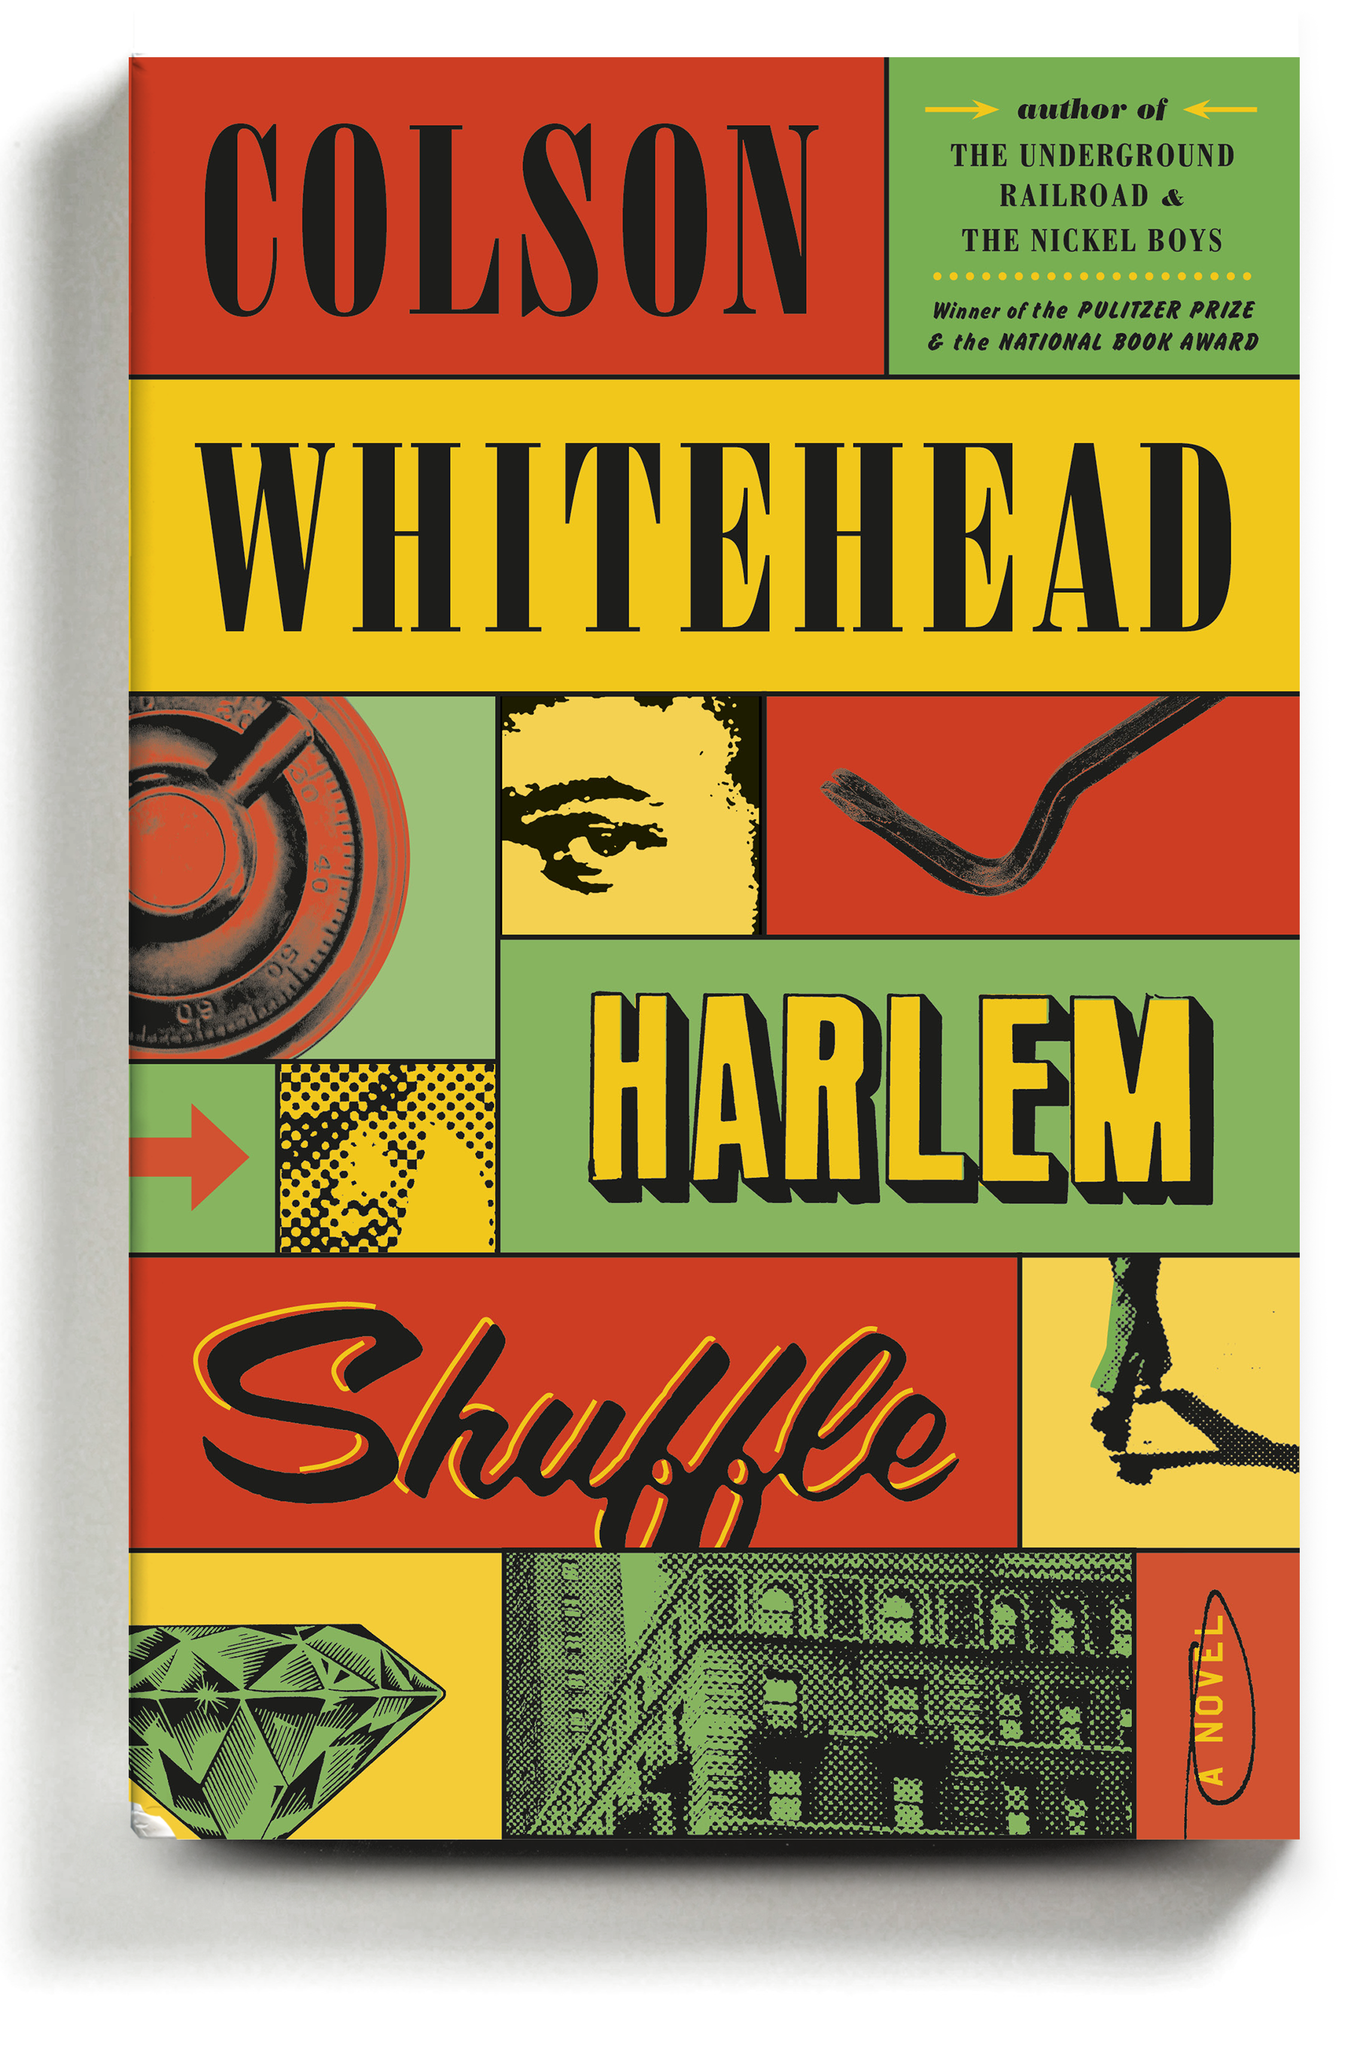 In Colson Whitehead’s New Novel, a Crime Grows in Harlem